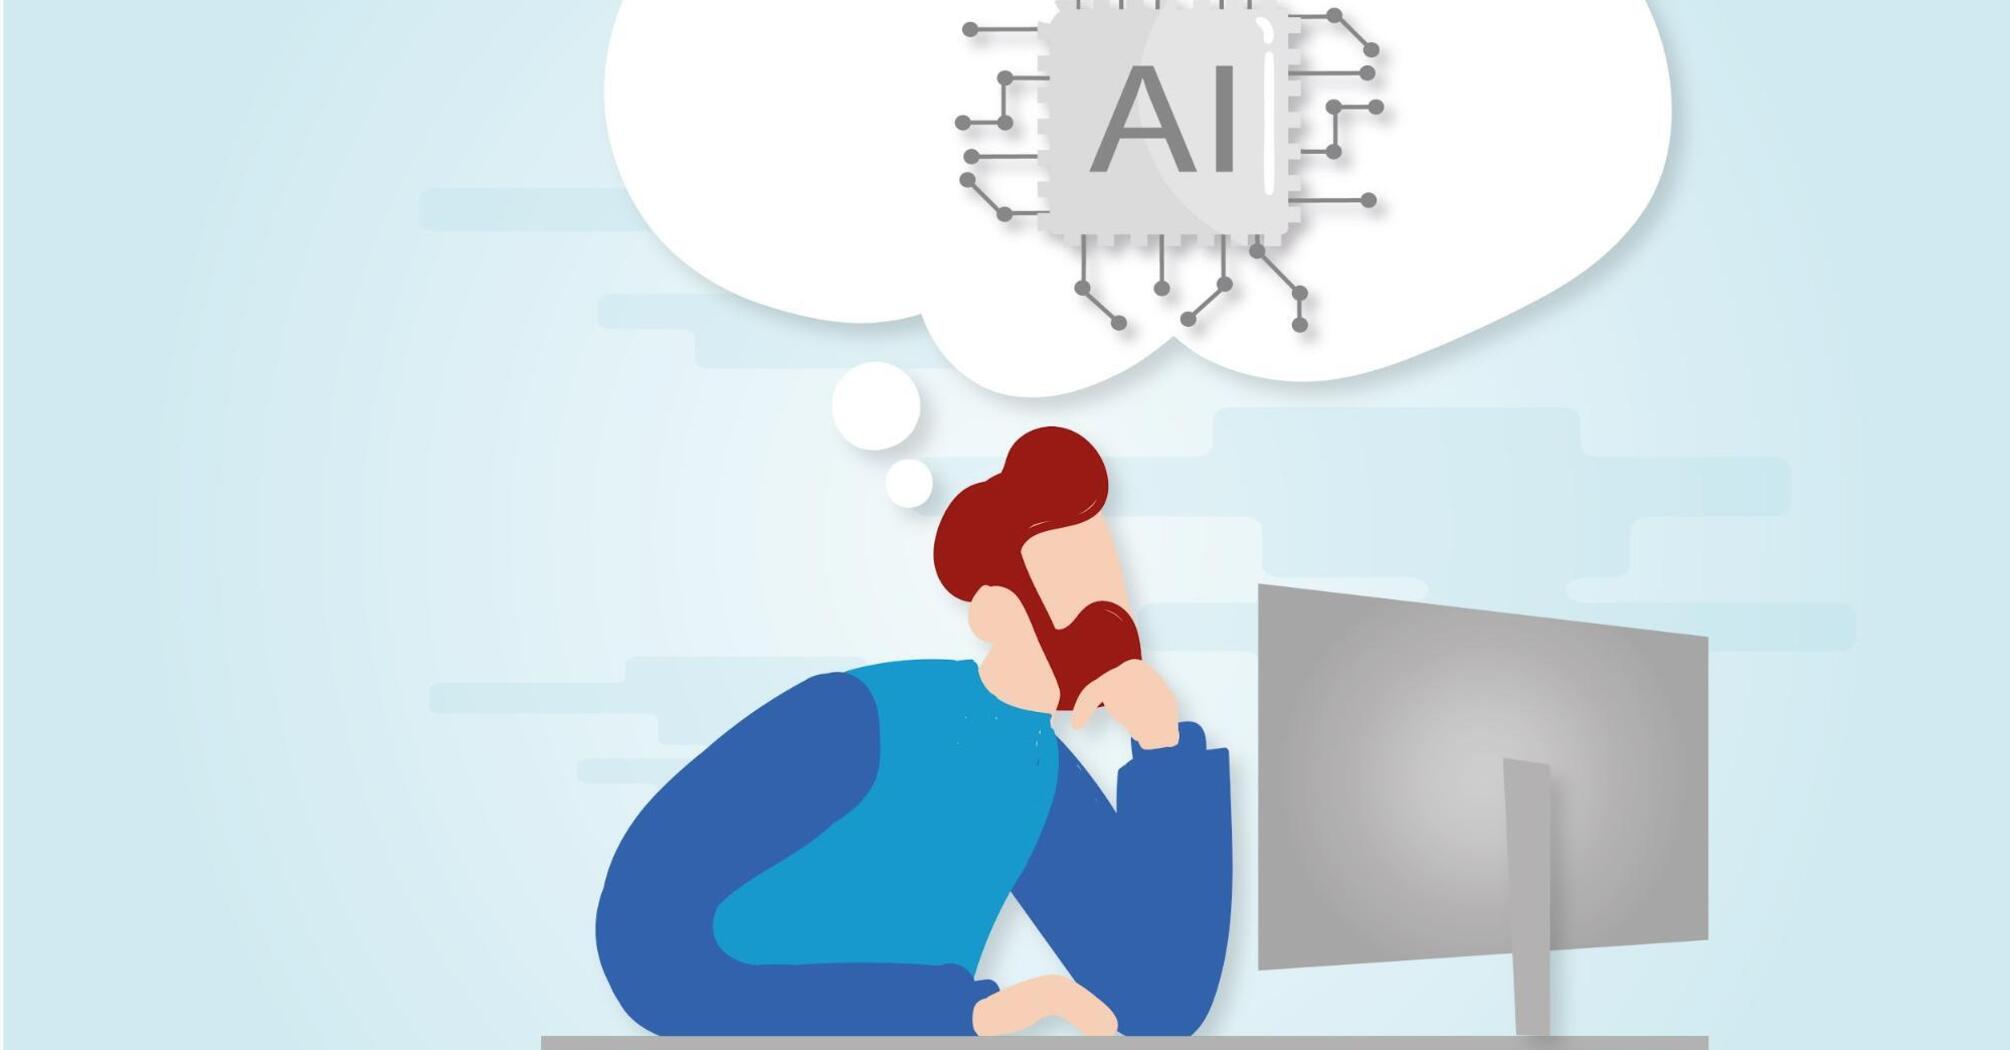 The man with the computer thought about AI